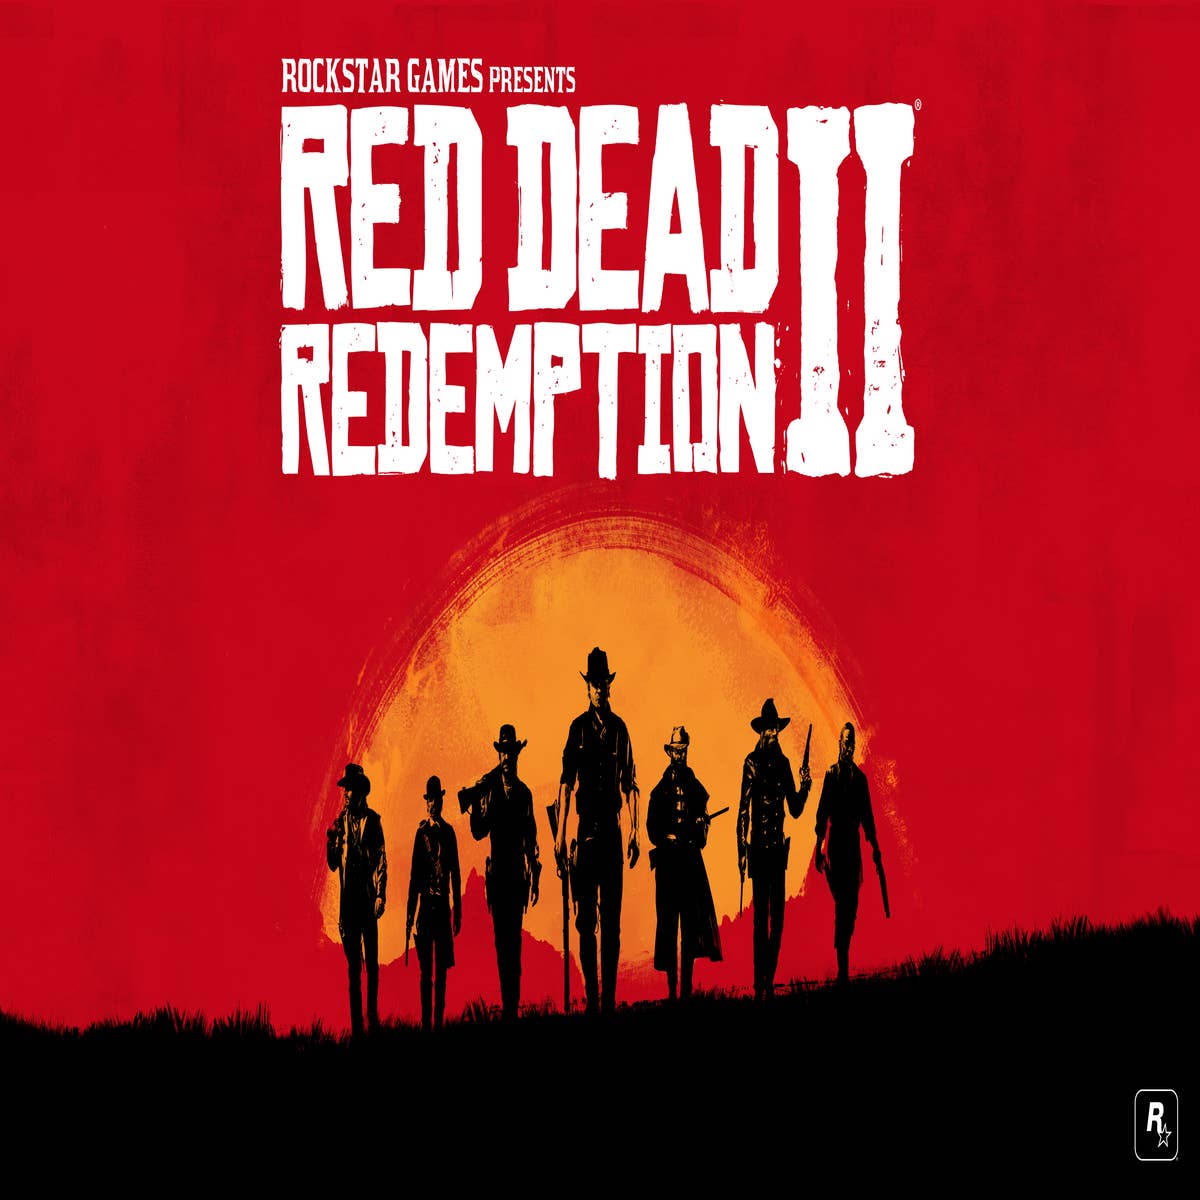 Red Dead Redemption 2 PC Tech Analysis, Comparison With PS4 Pro